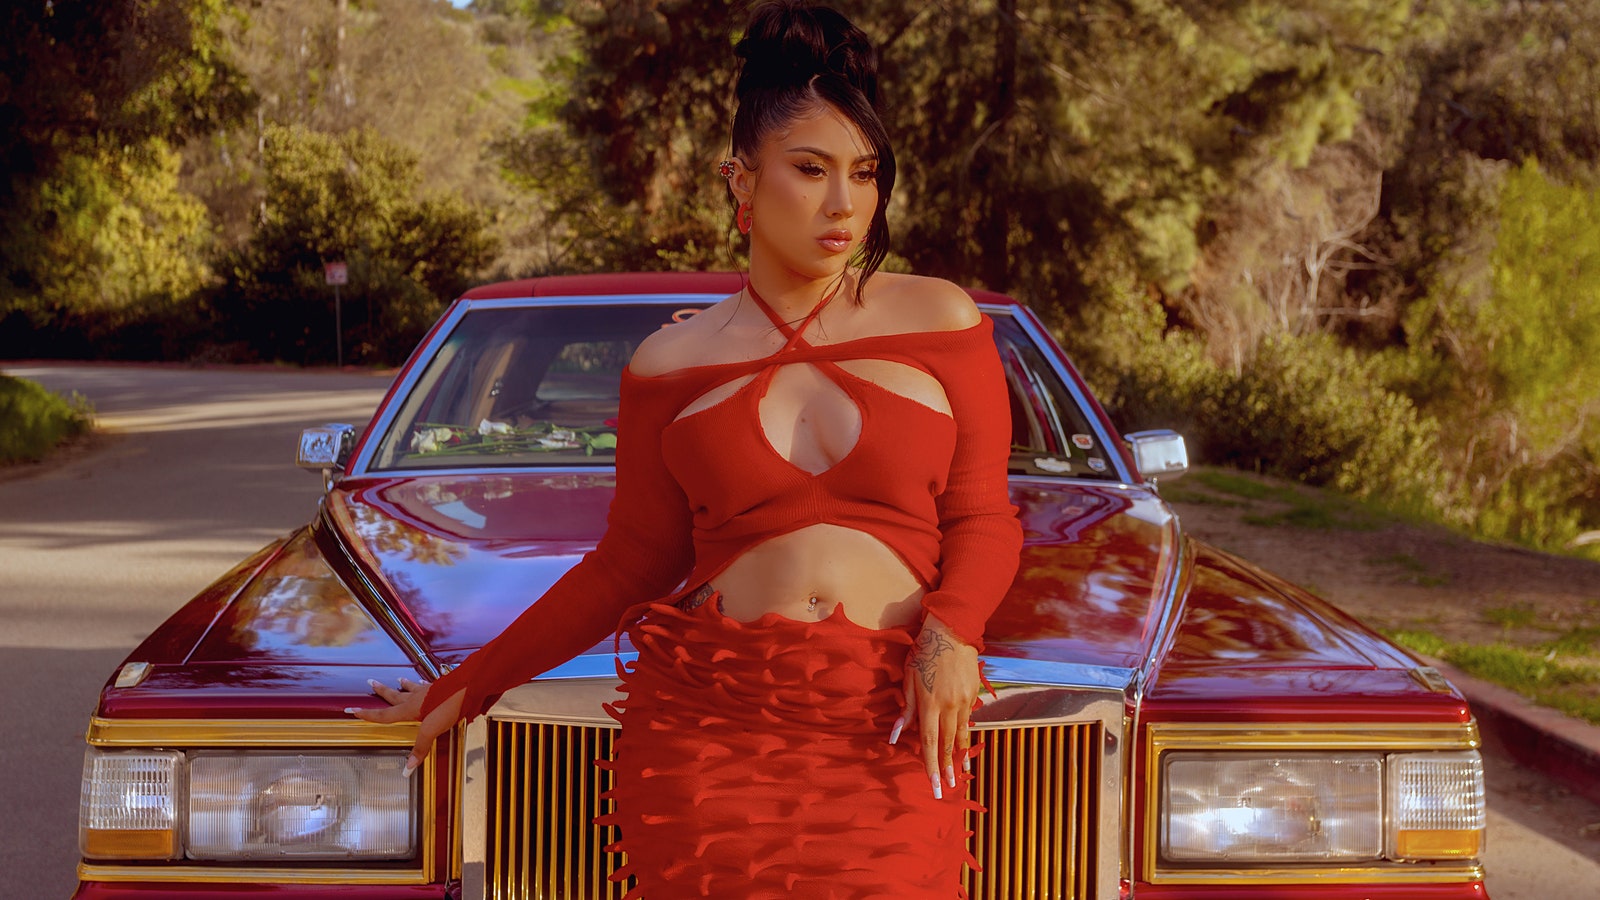 Welcome to Kali Uchis’ High-Femme Fantasy